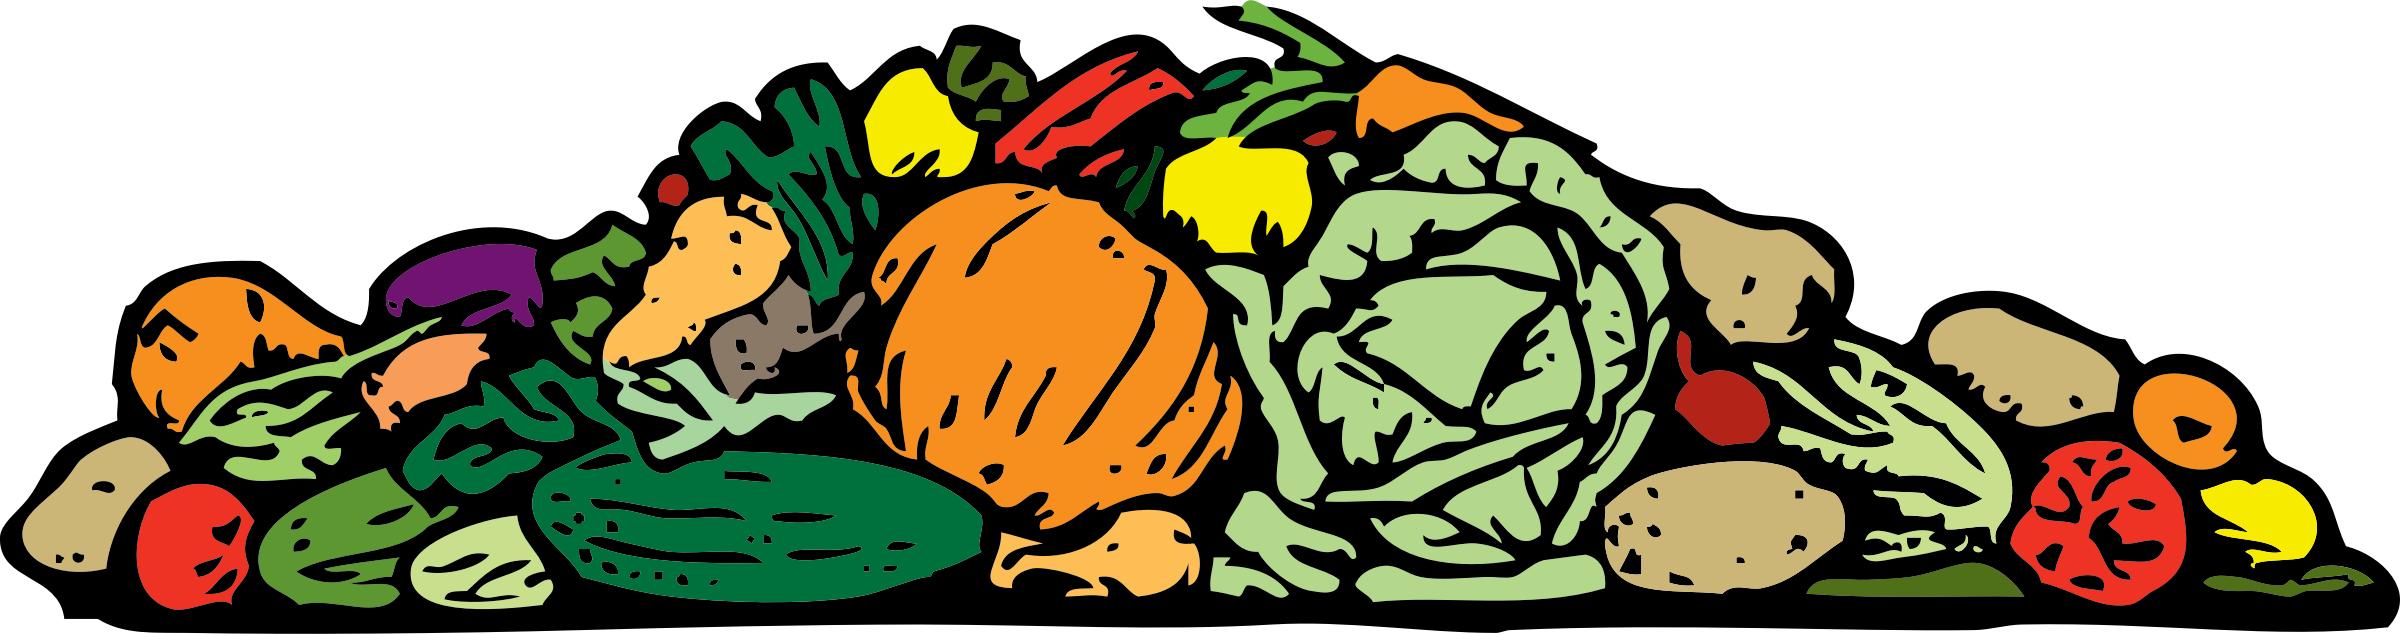 a pile of vegetables png